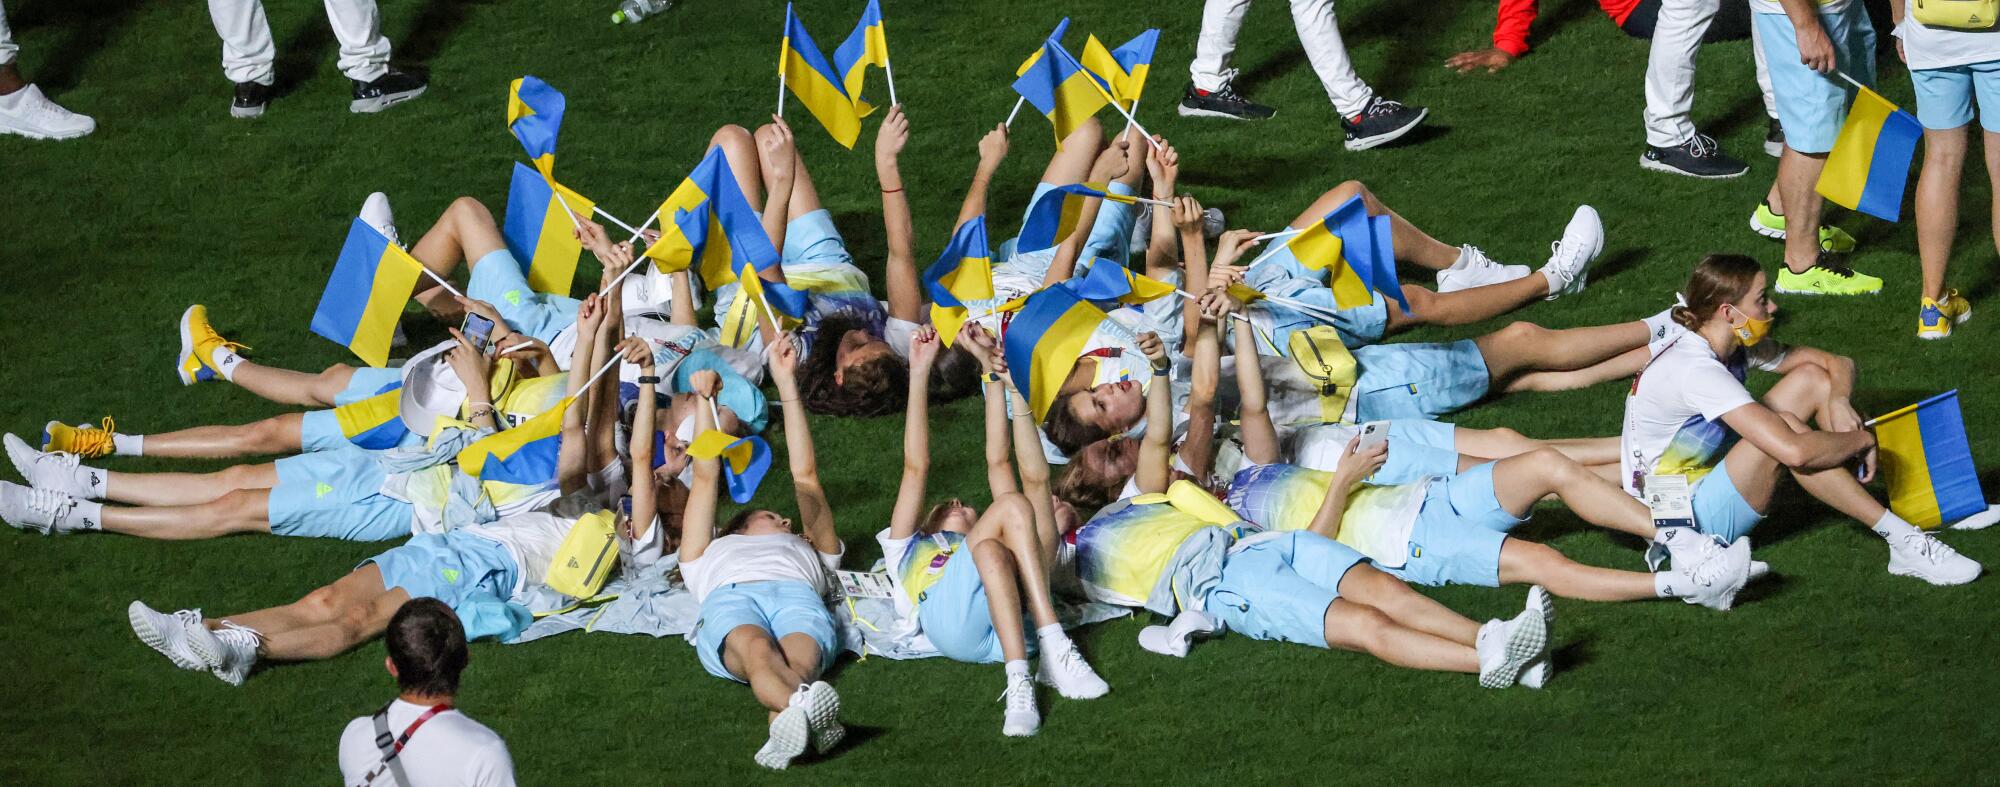 Young people lie in a circle with their heads in the center, waving small blue and yell flags.